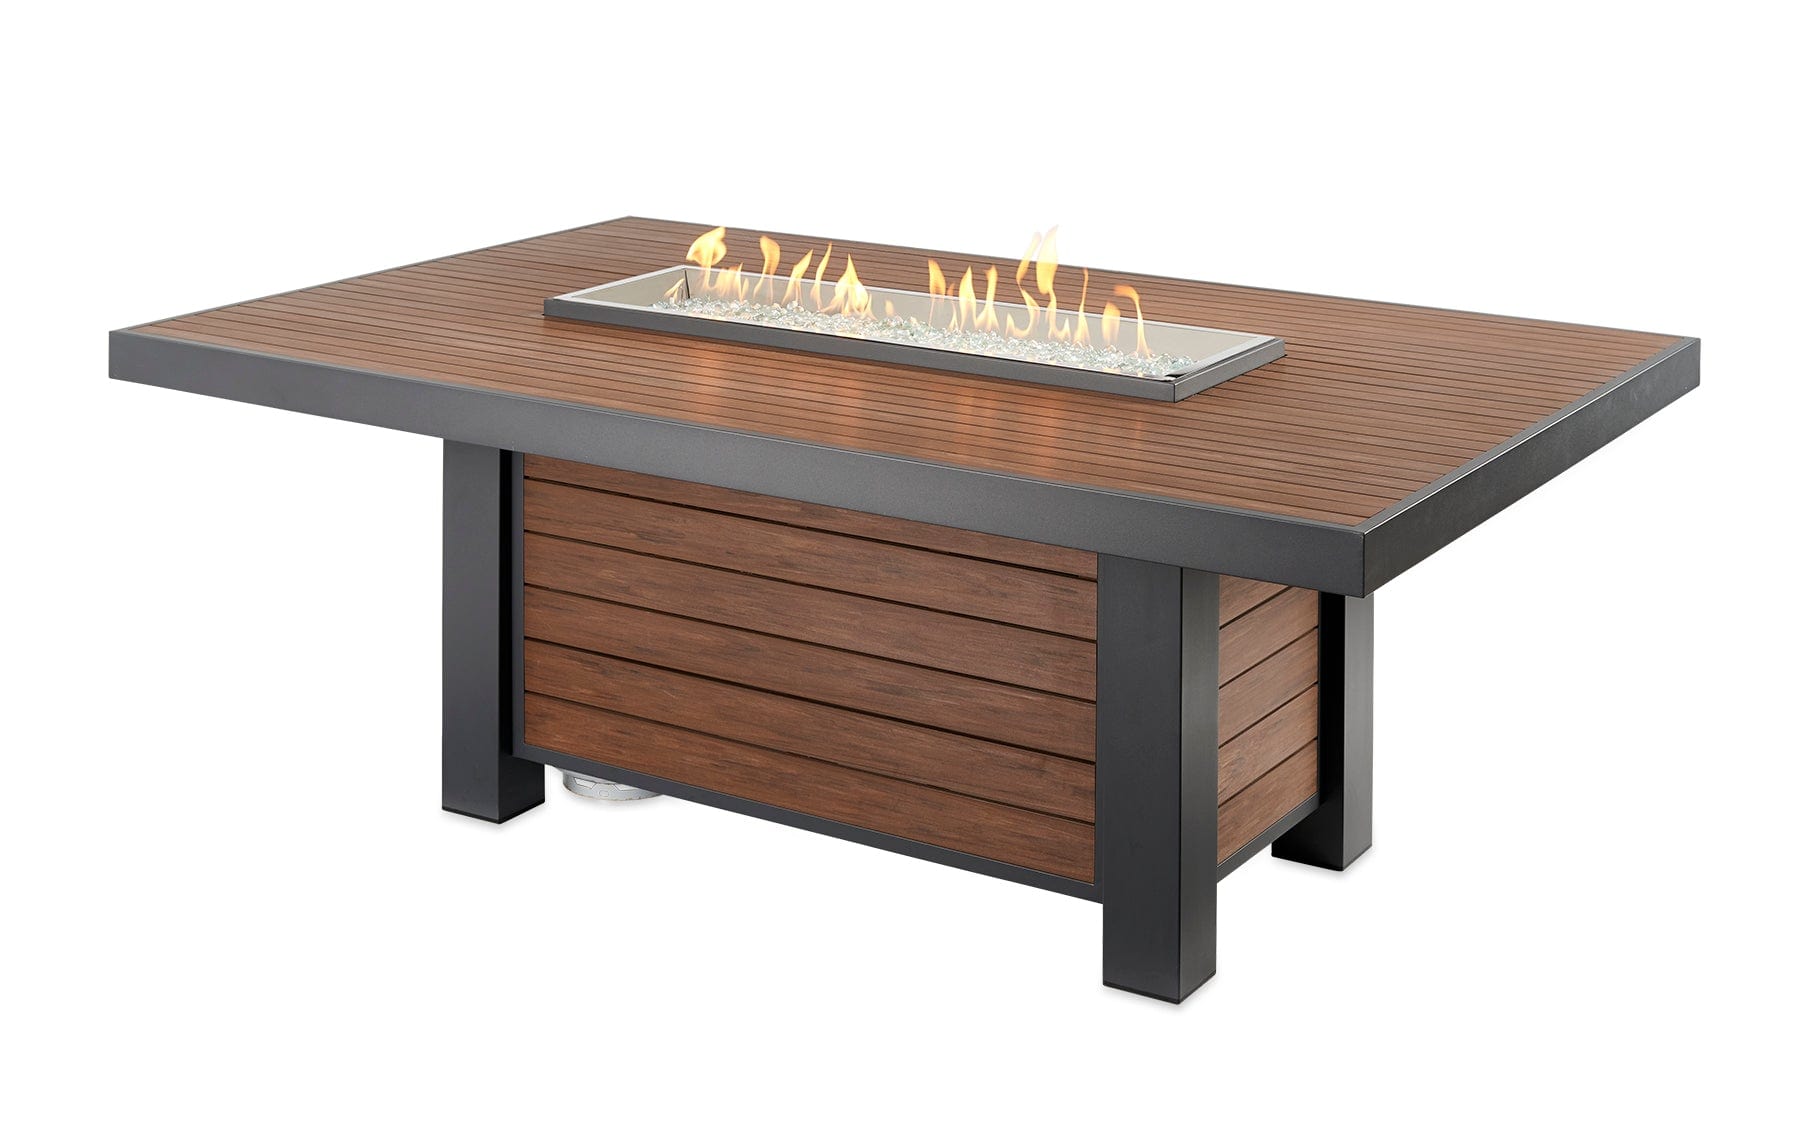 The Outdoor Great Room Fire Features The Outdoor GreatRoom Kenwood Linear Dining Height Gas Fire Pit Table / KW-1242-K